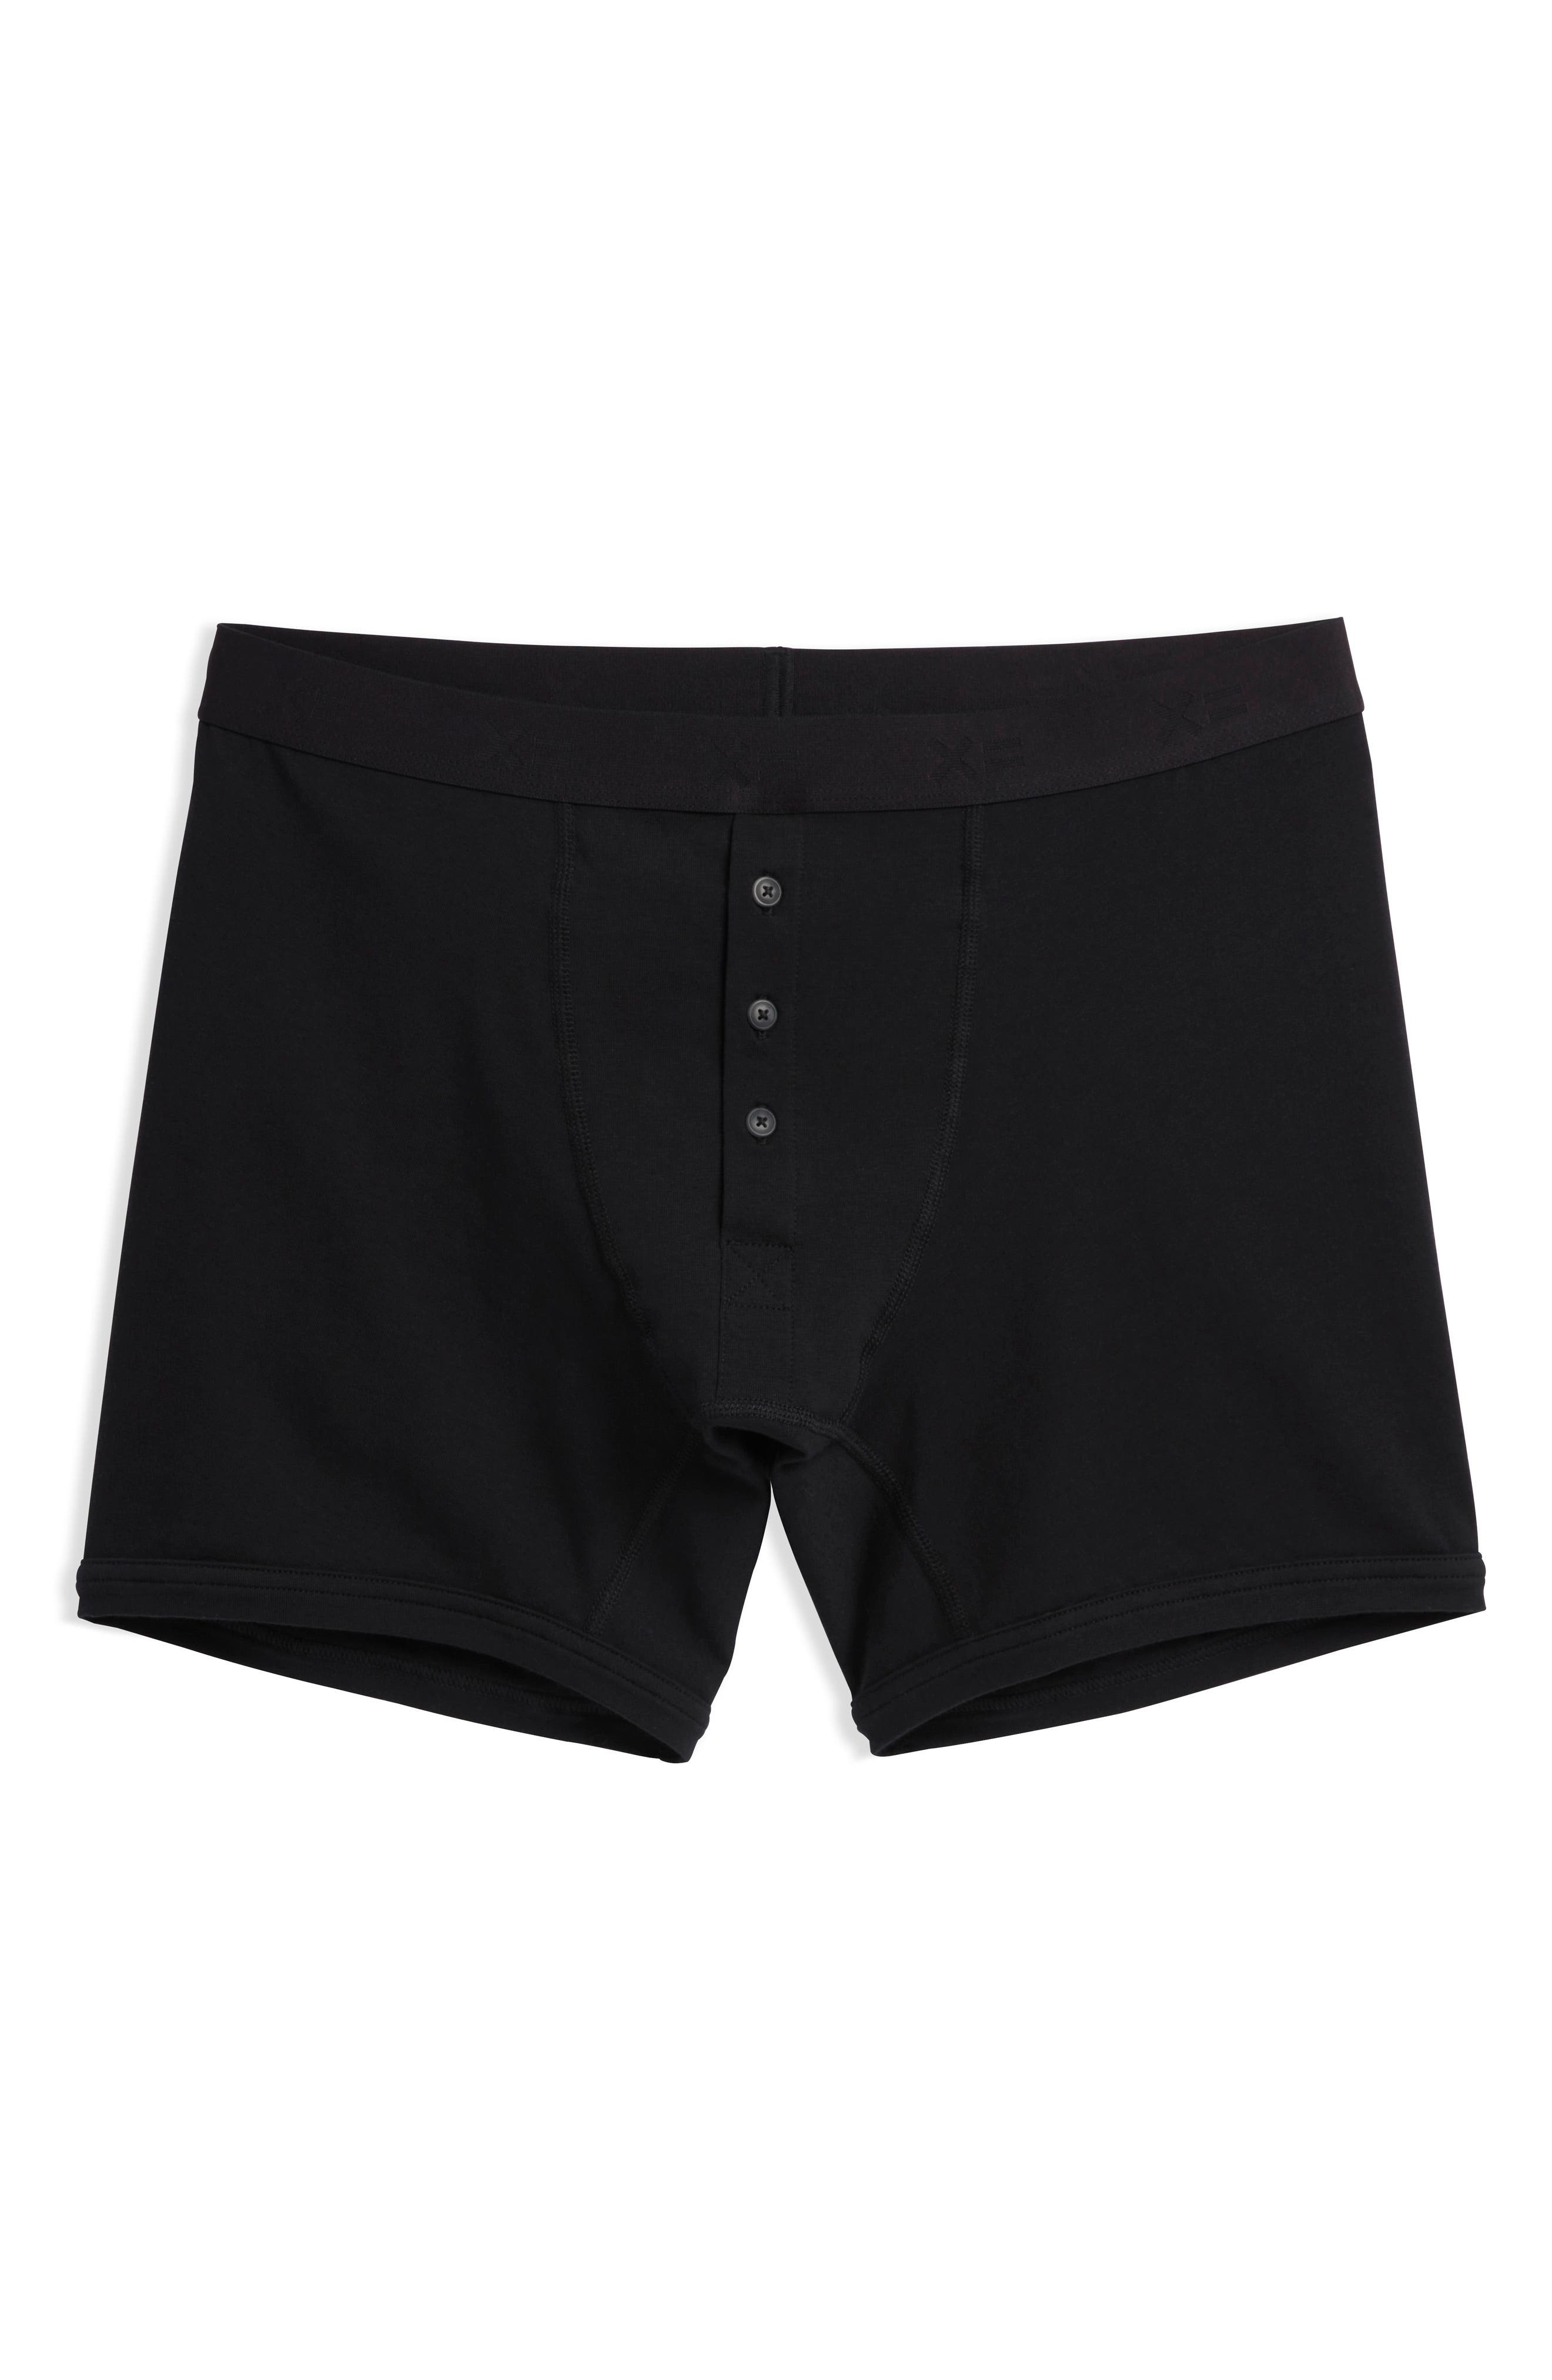 TomboyX First Line Stretch Cotton Period 4.5-Inch Trunks